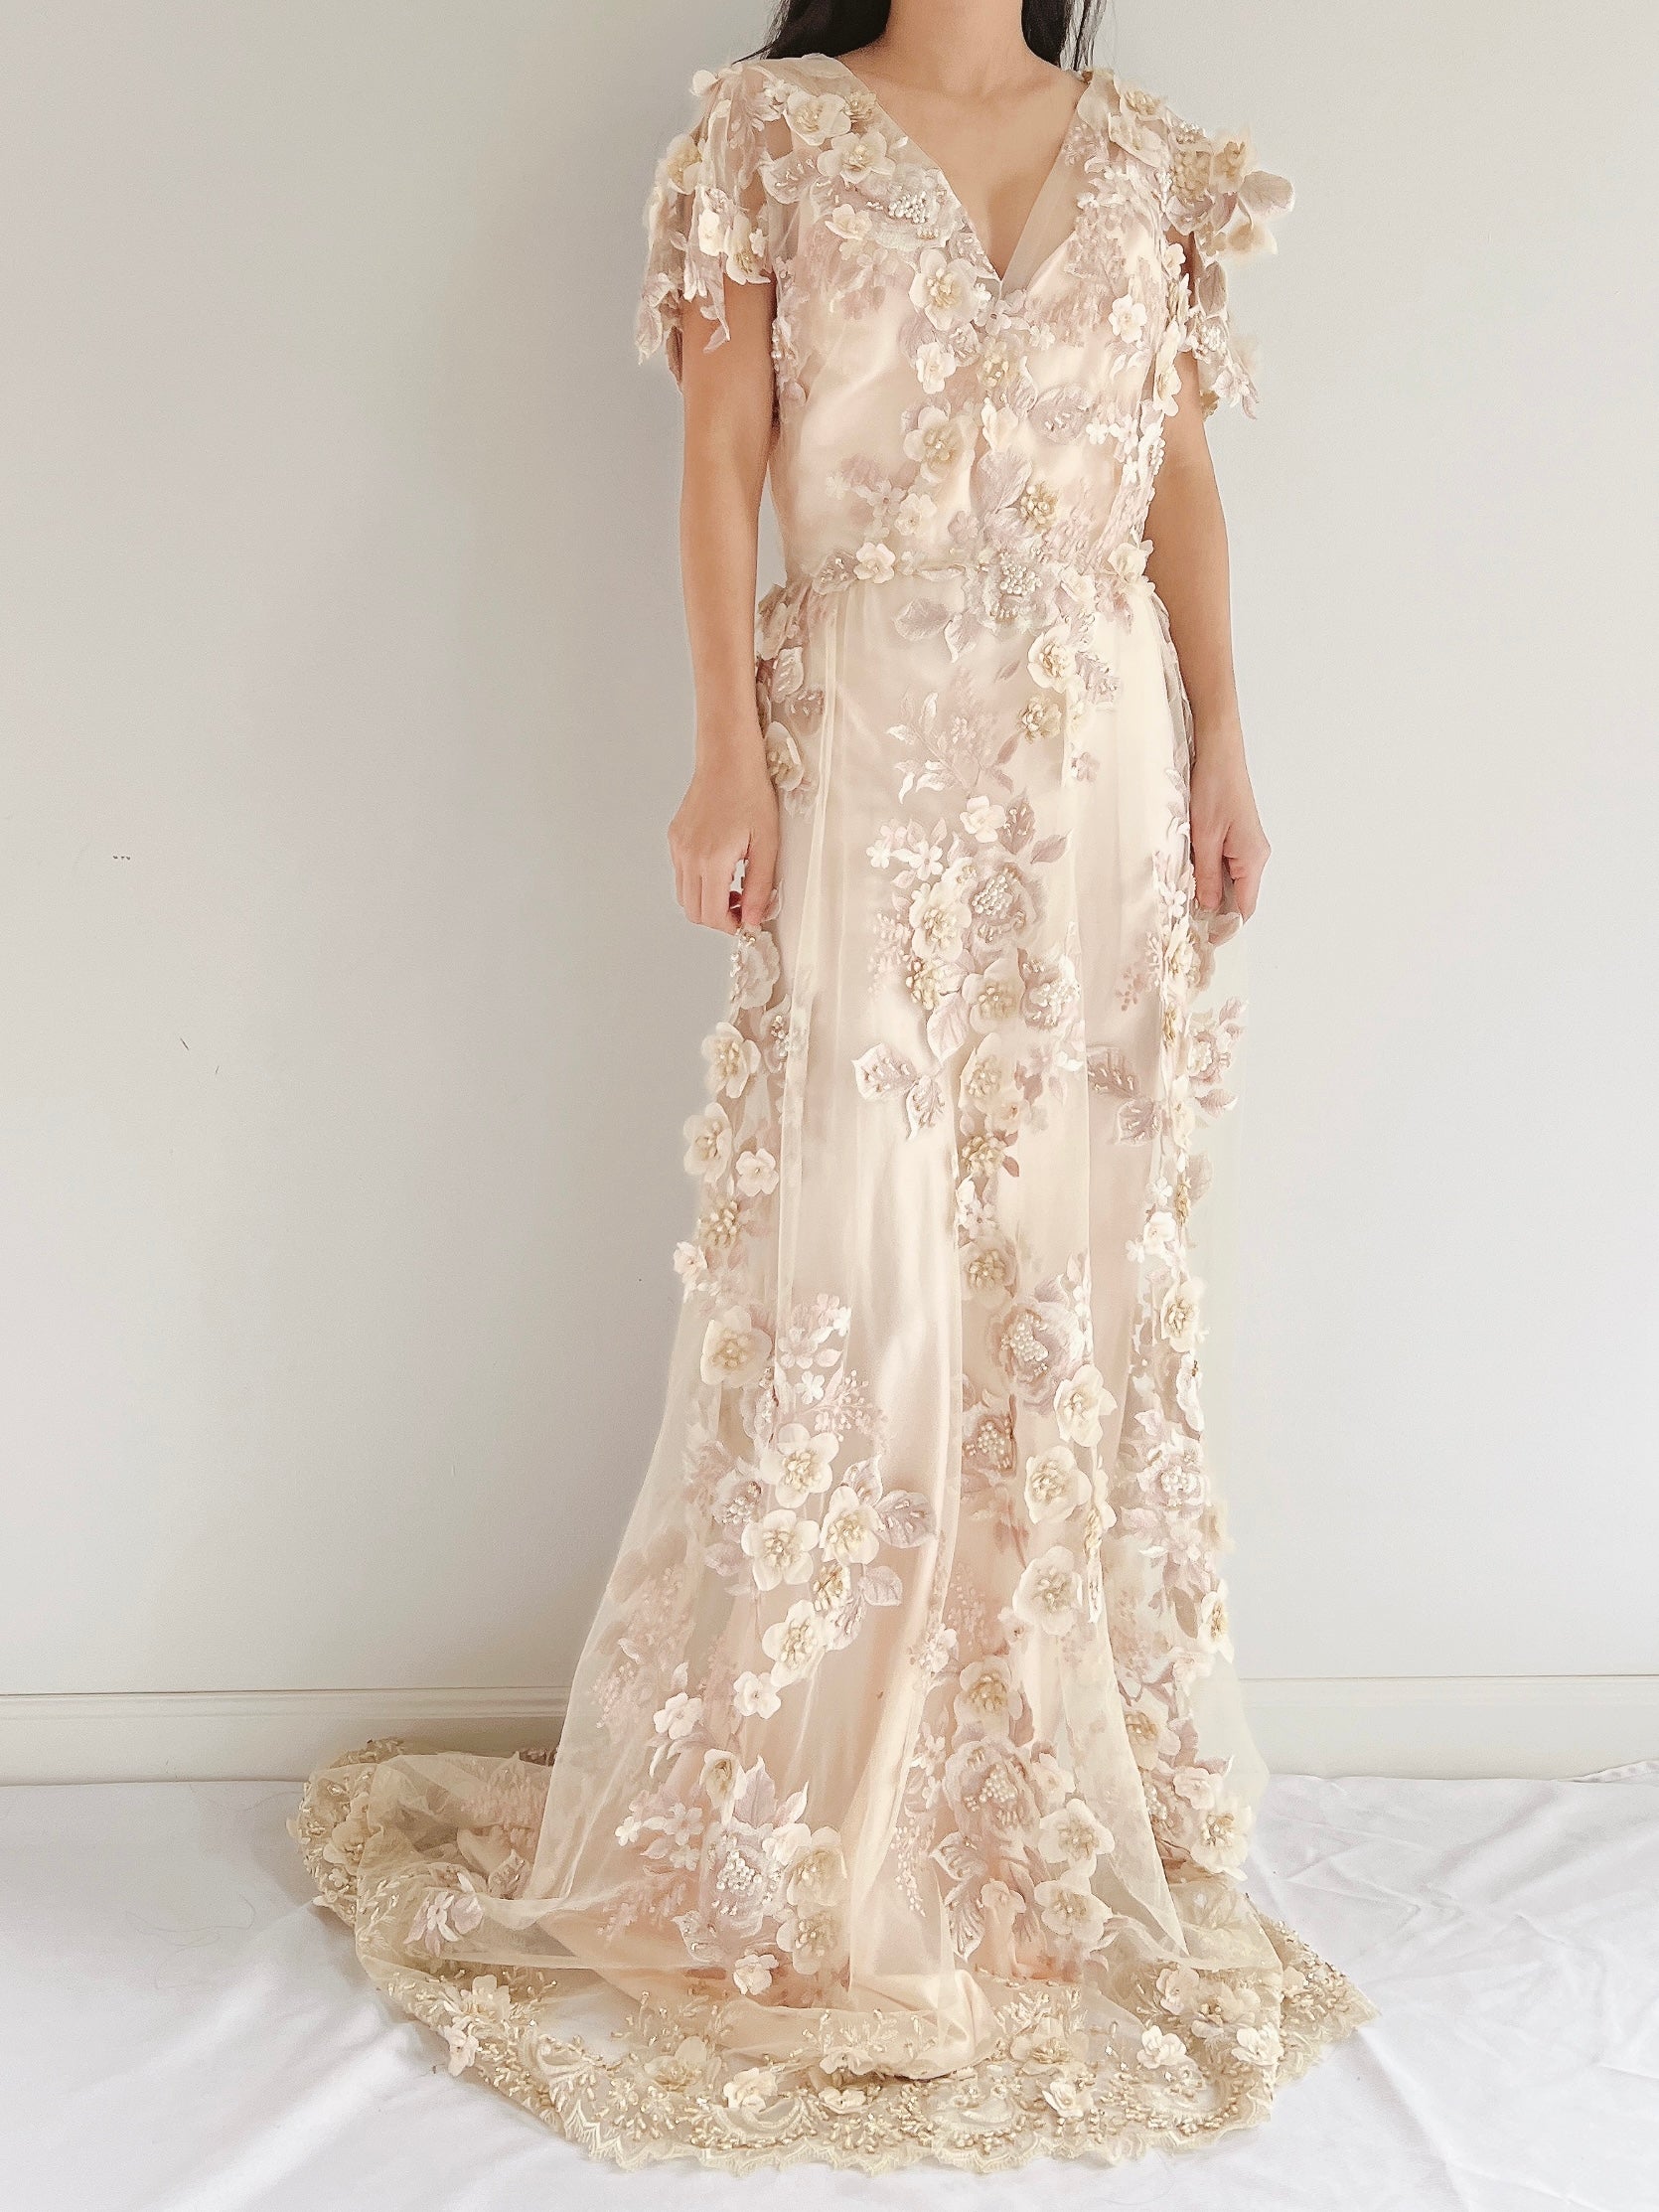 GOSSAMER Embroidered Cap Sleeves Gown - S/M